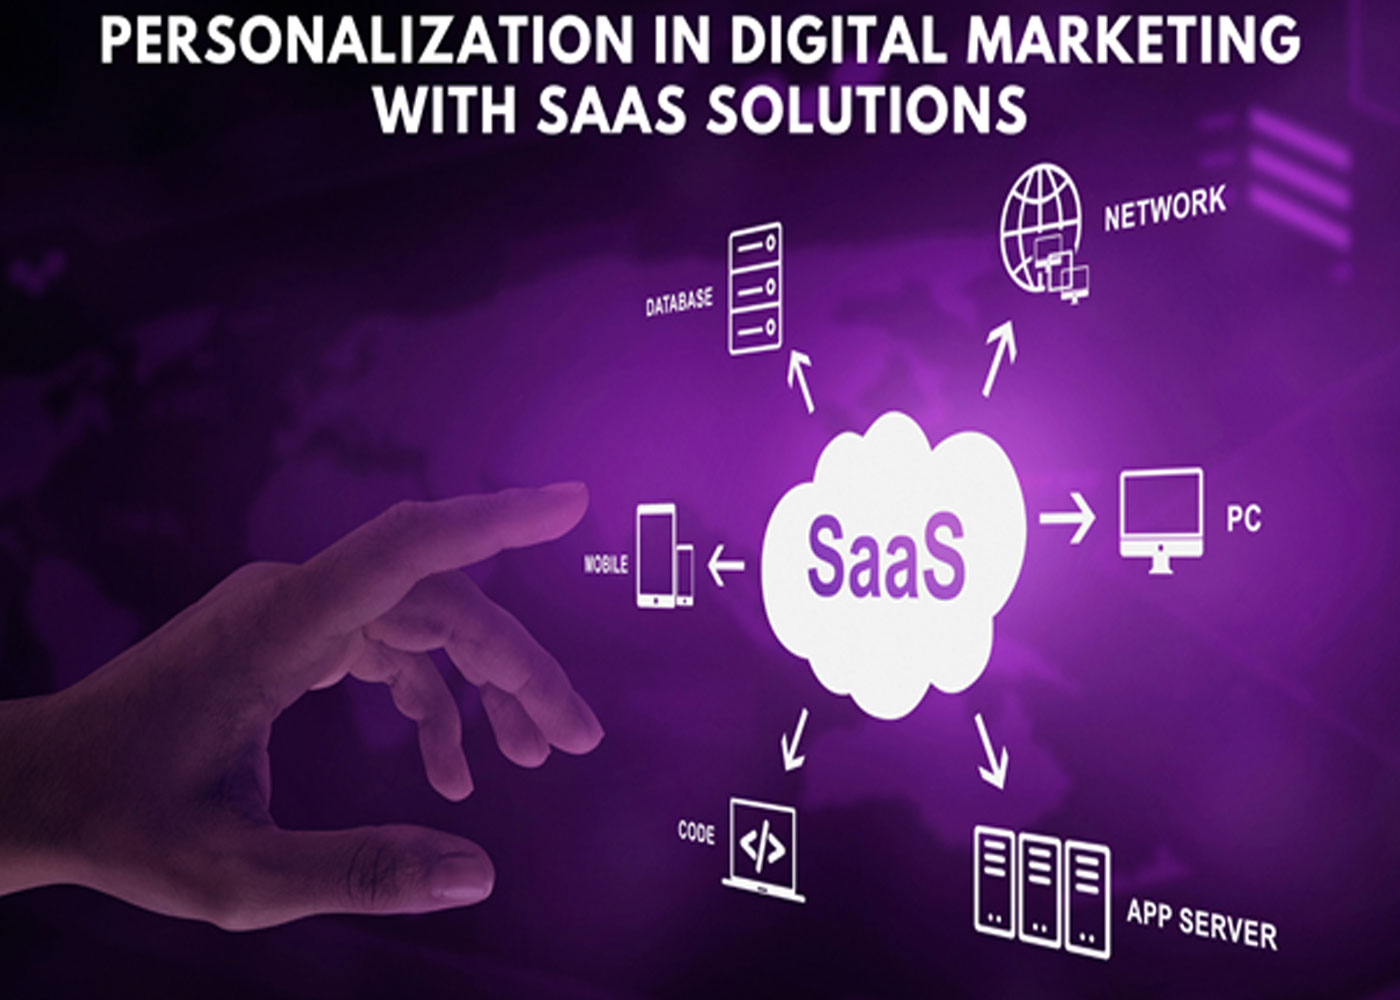 Personalization in Digital Marketing with SaaS Solutions